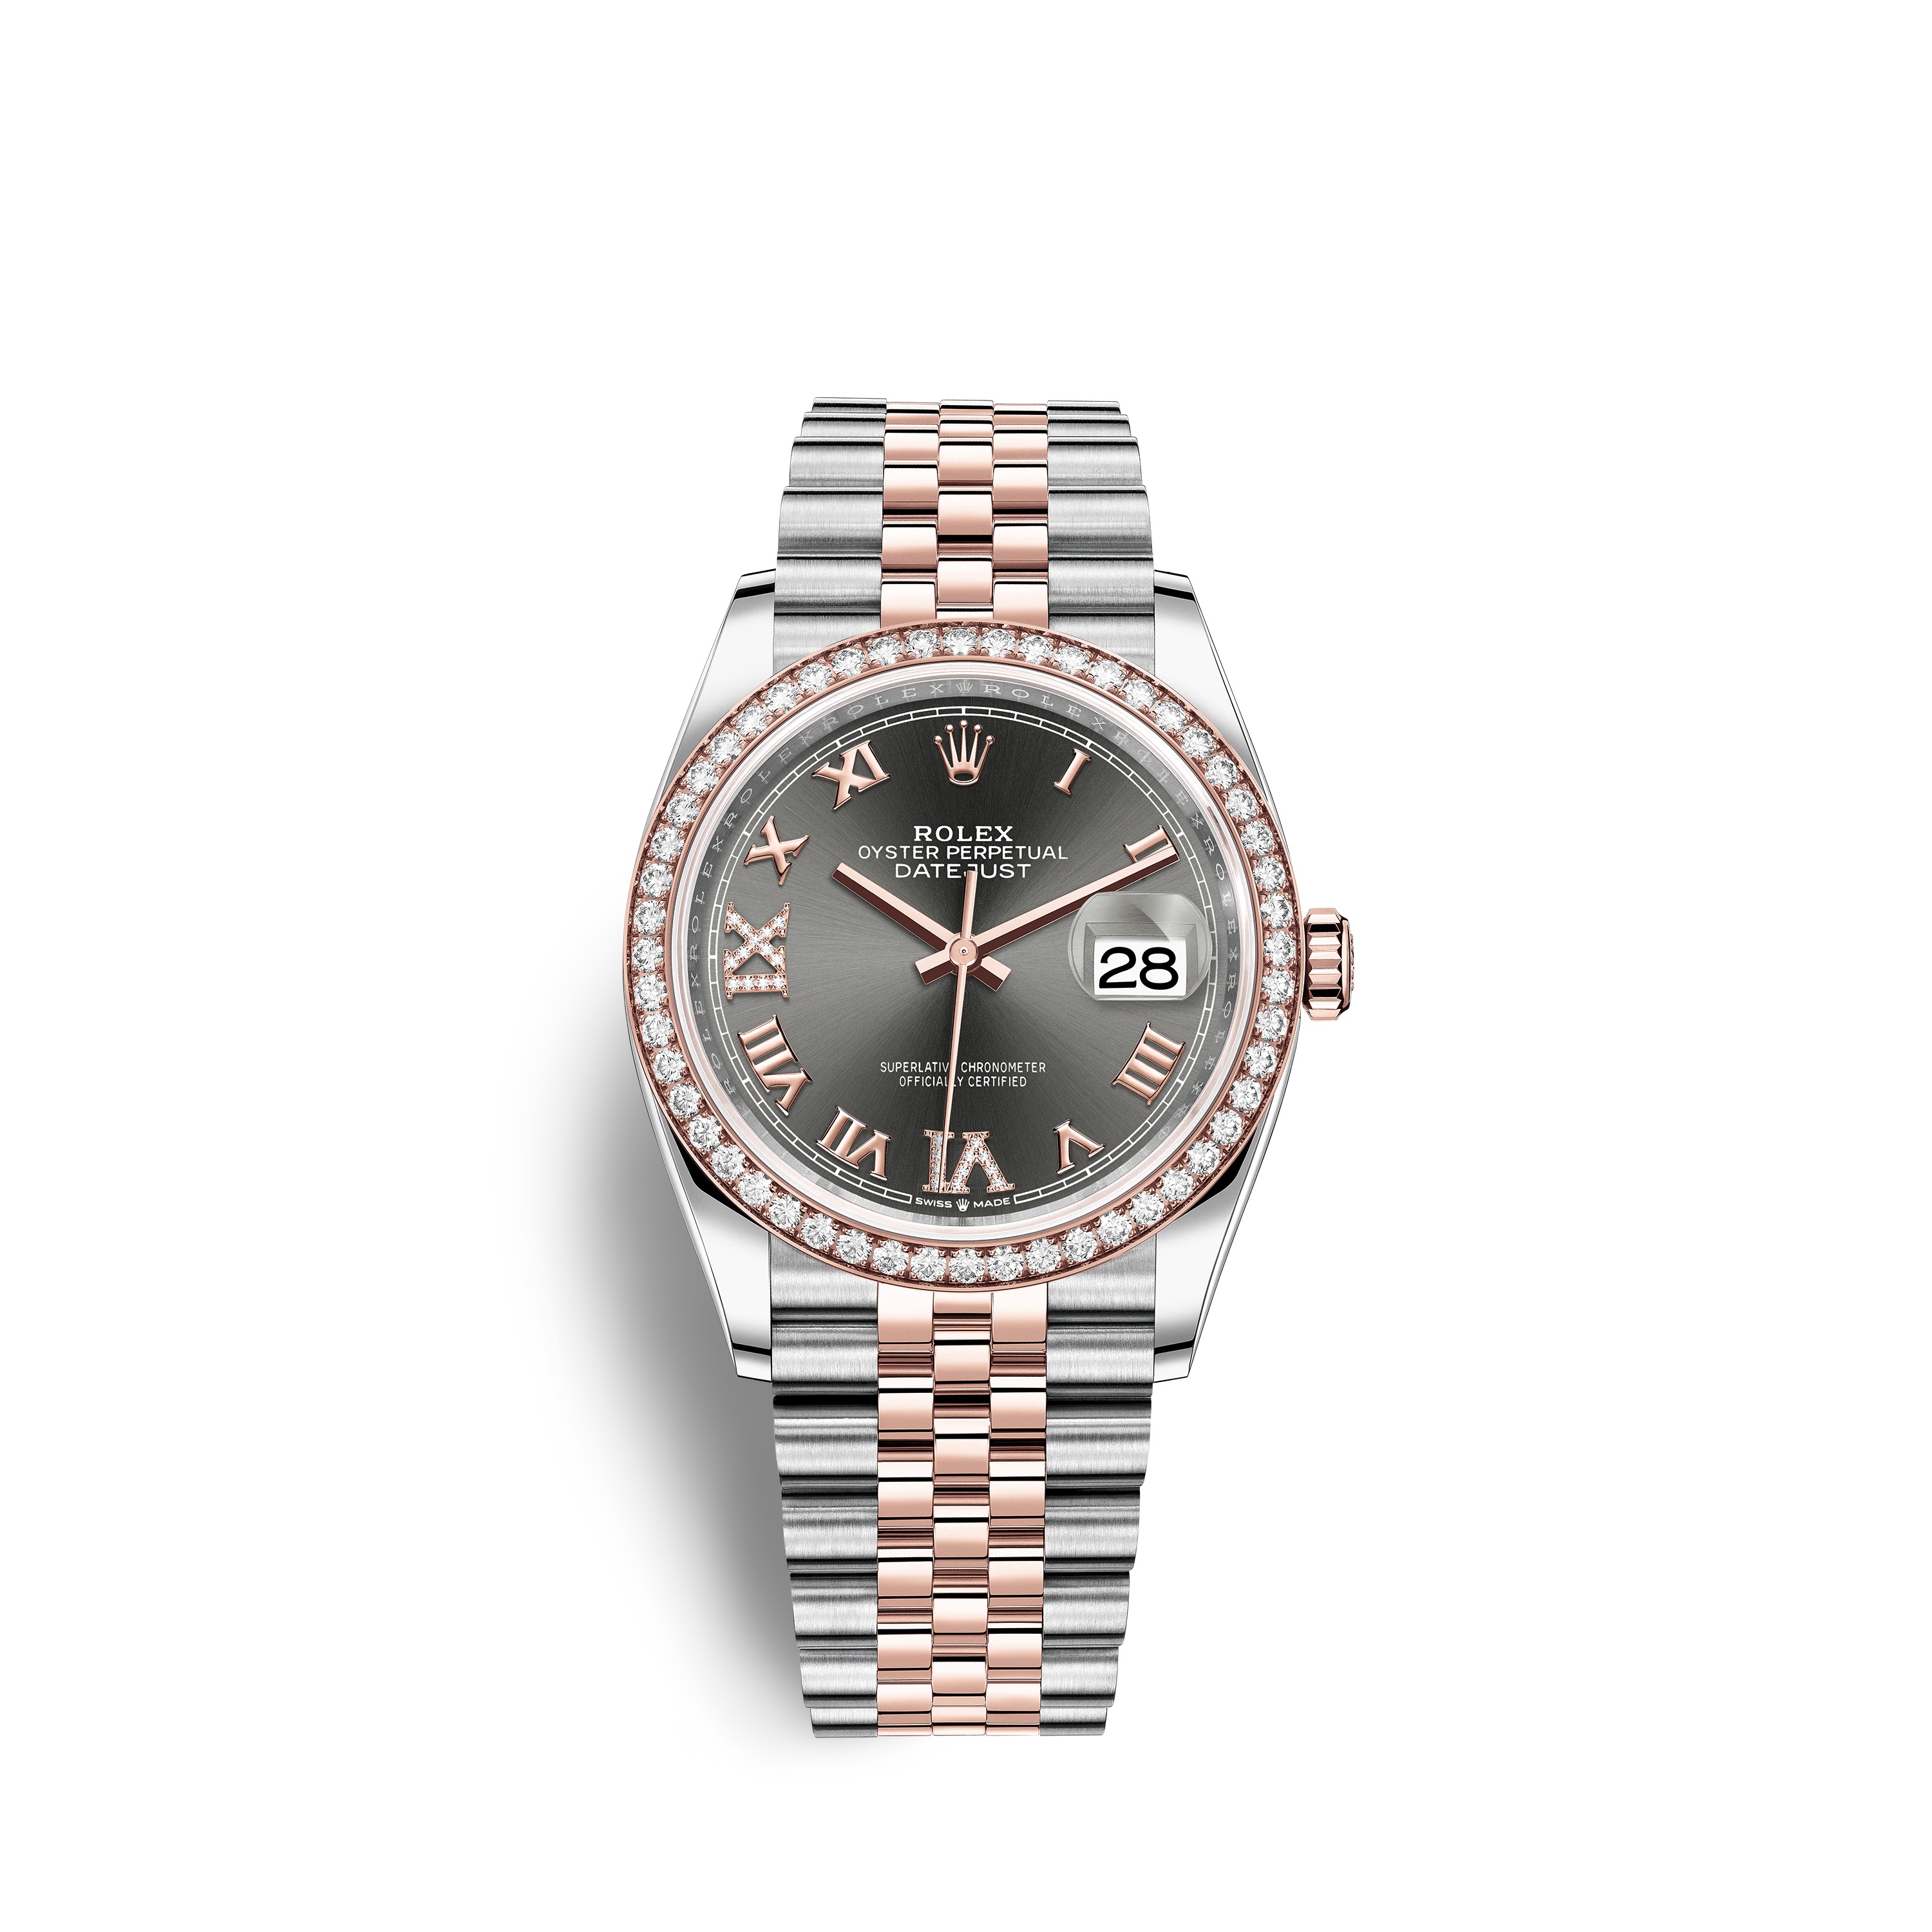 Datejust 36 126281RBR Rose Gold & Stainless Steel Watch (Dark Rhodium Set with Diamonds) - Click Image to Close